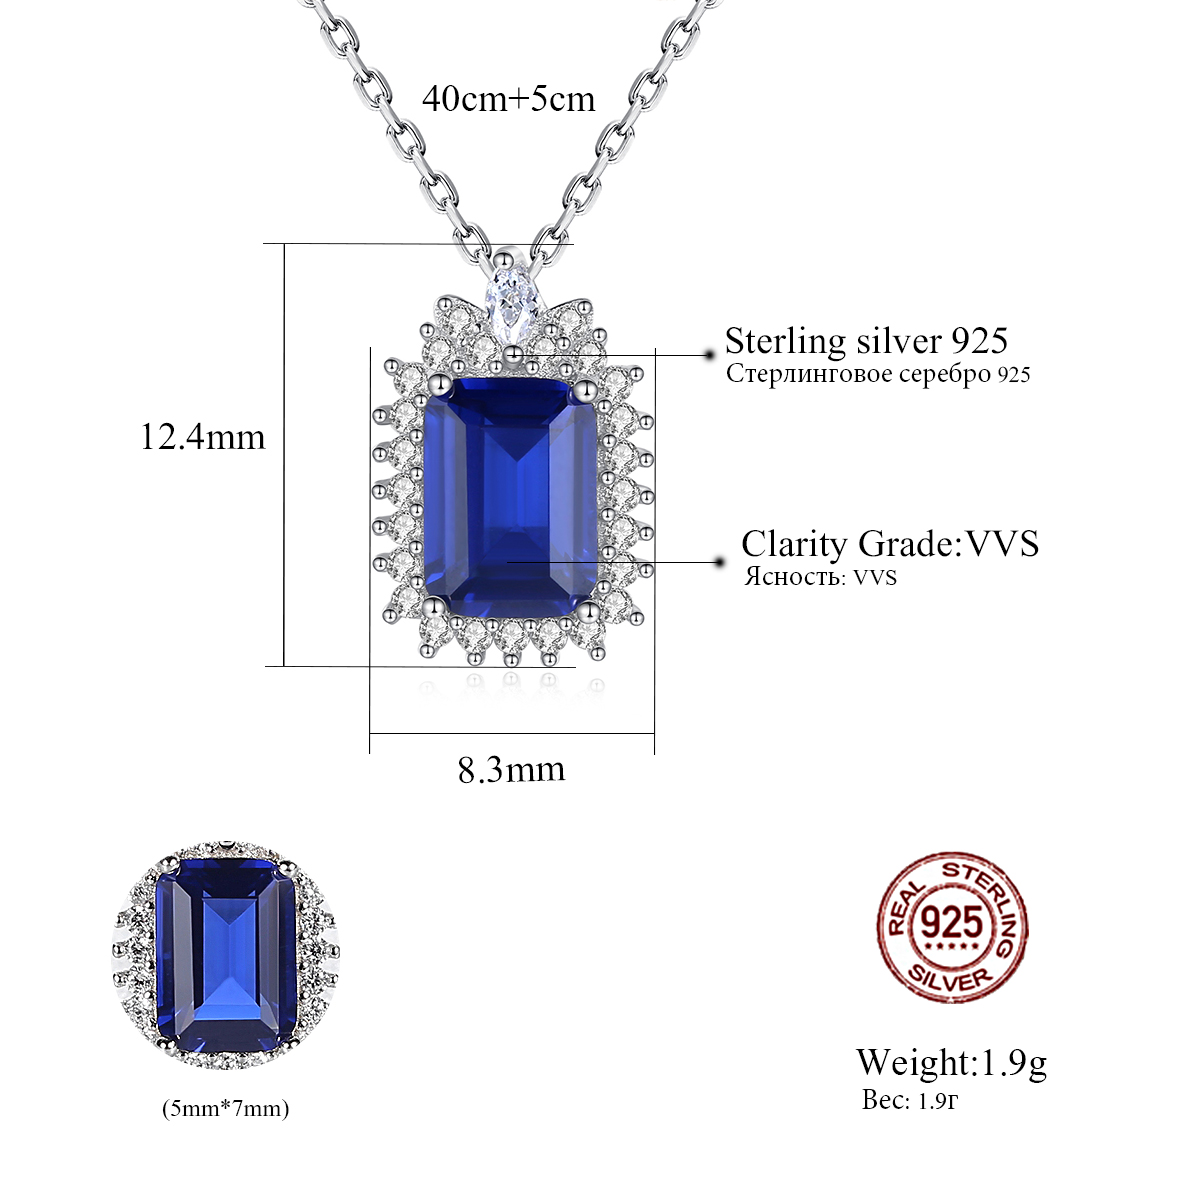 Rhodium Plated Square Dark Blue Saphire Sterling Silver Necklace